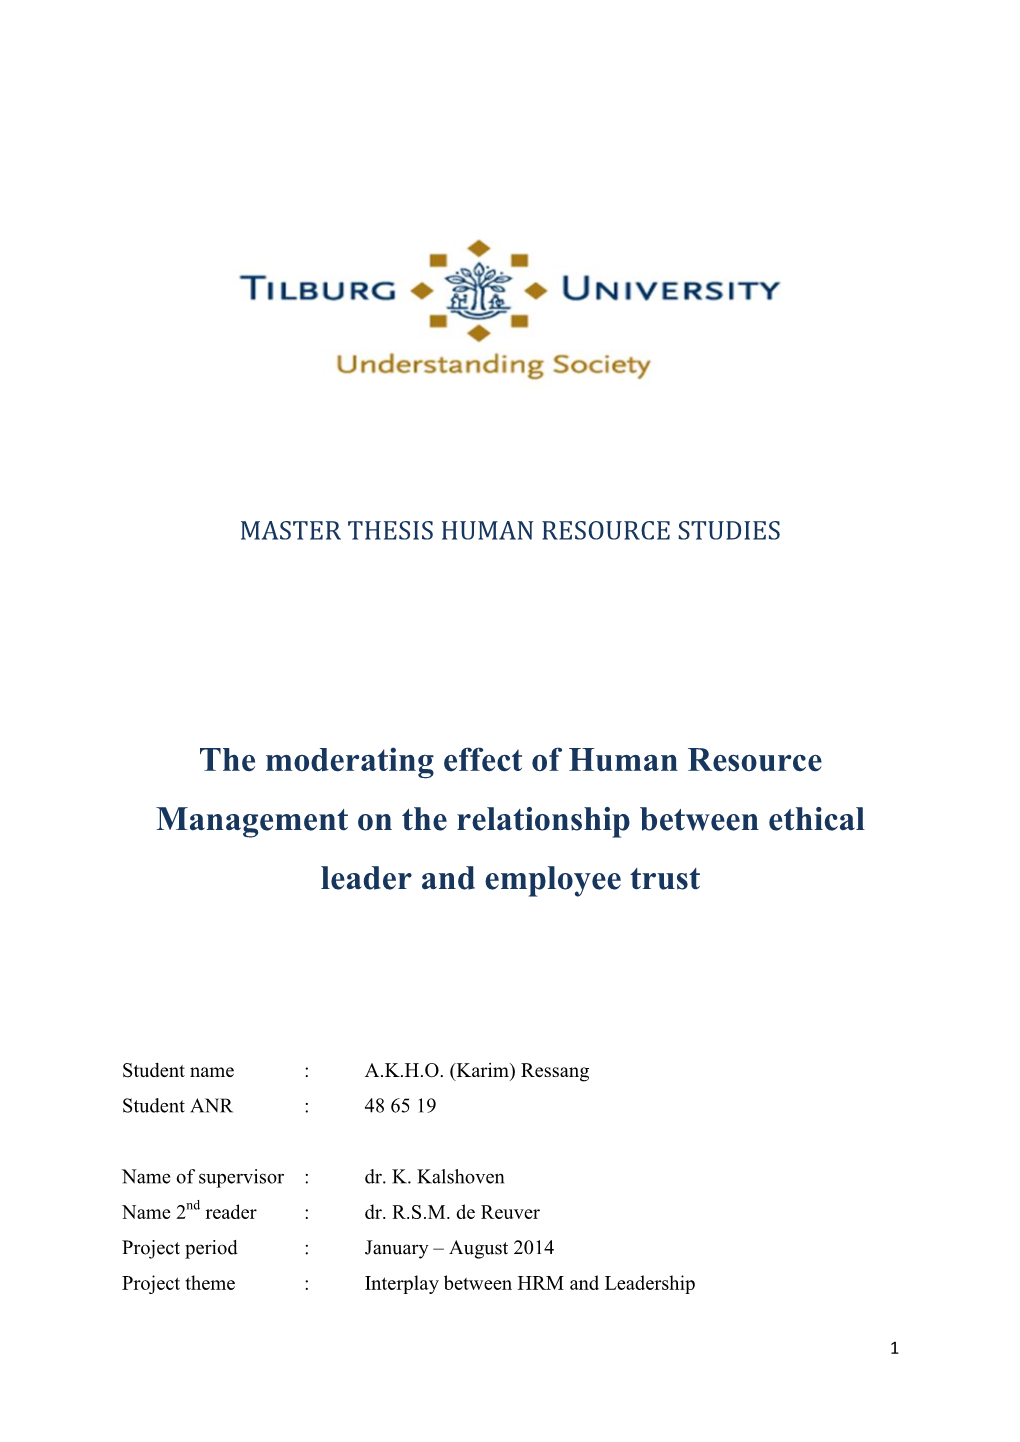 The Moderating Effect of Human Resource Management on the Relationship Between Ethical Leader and Employee Trust